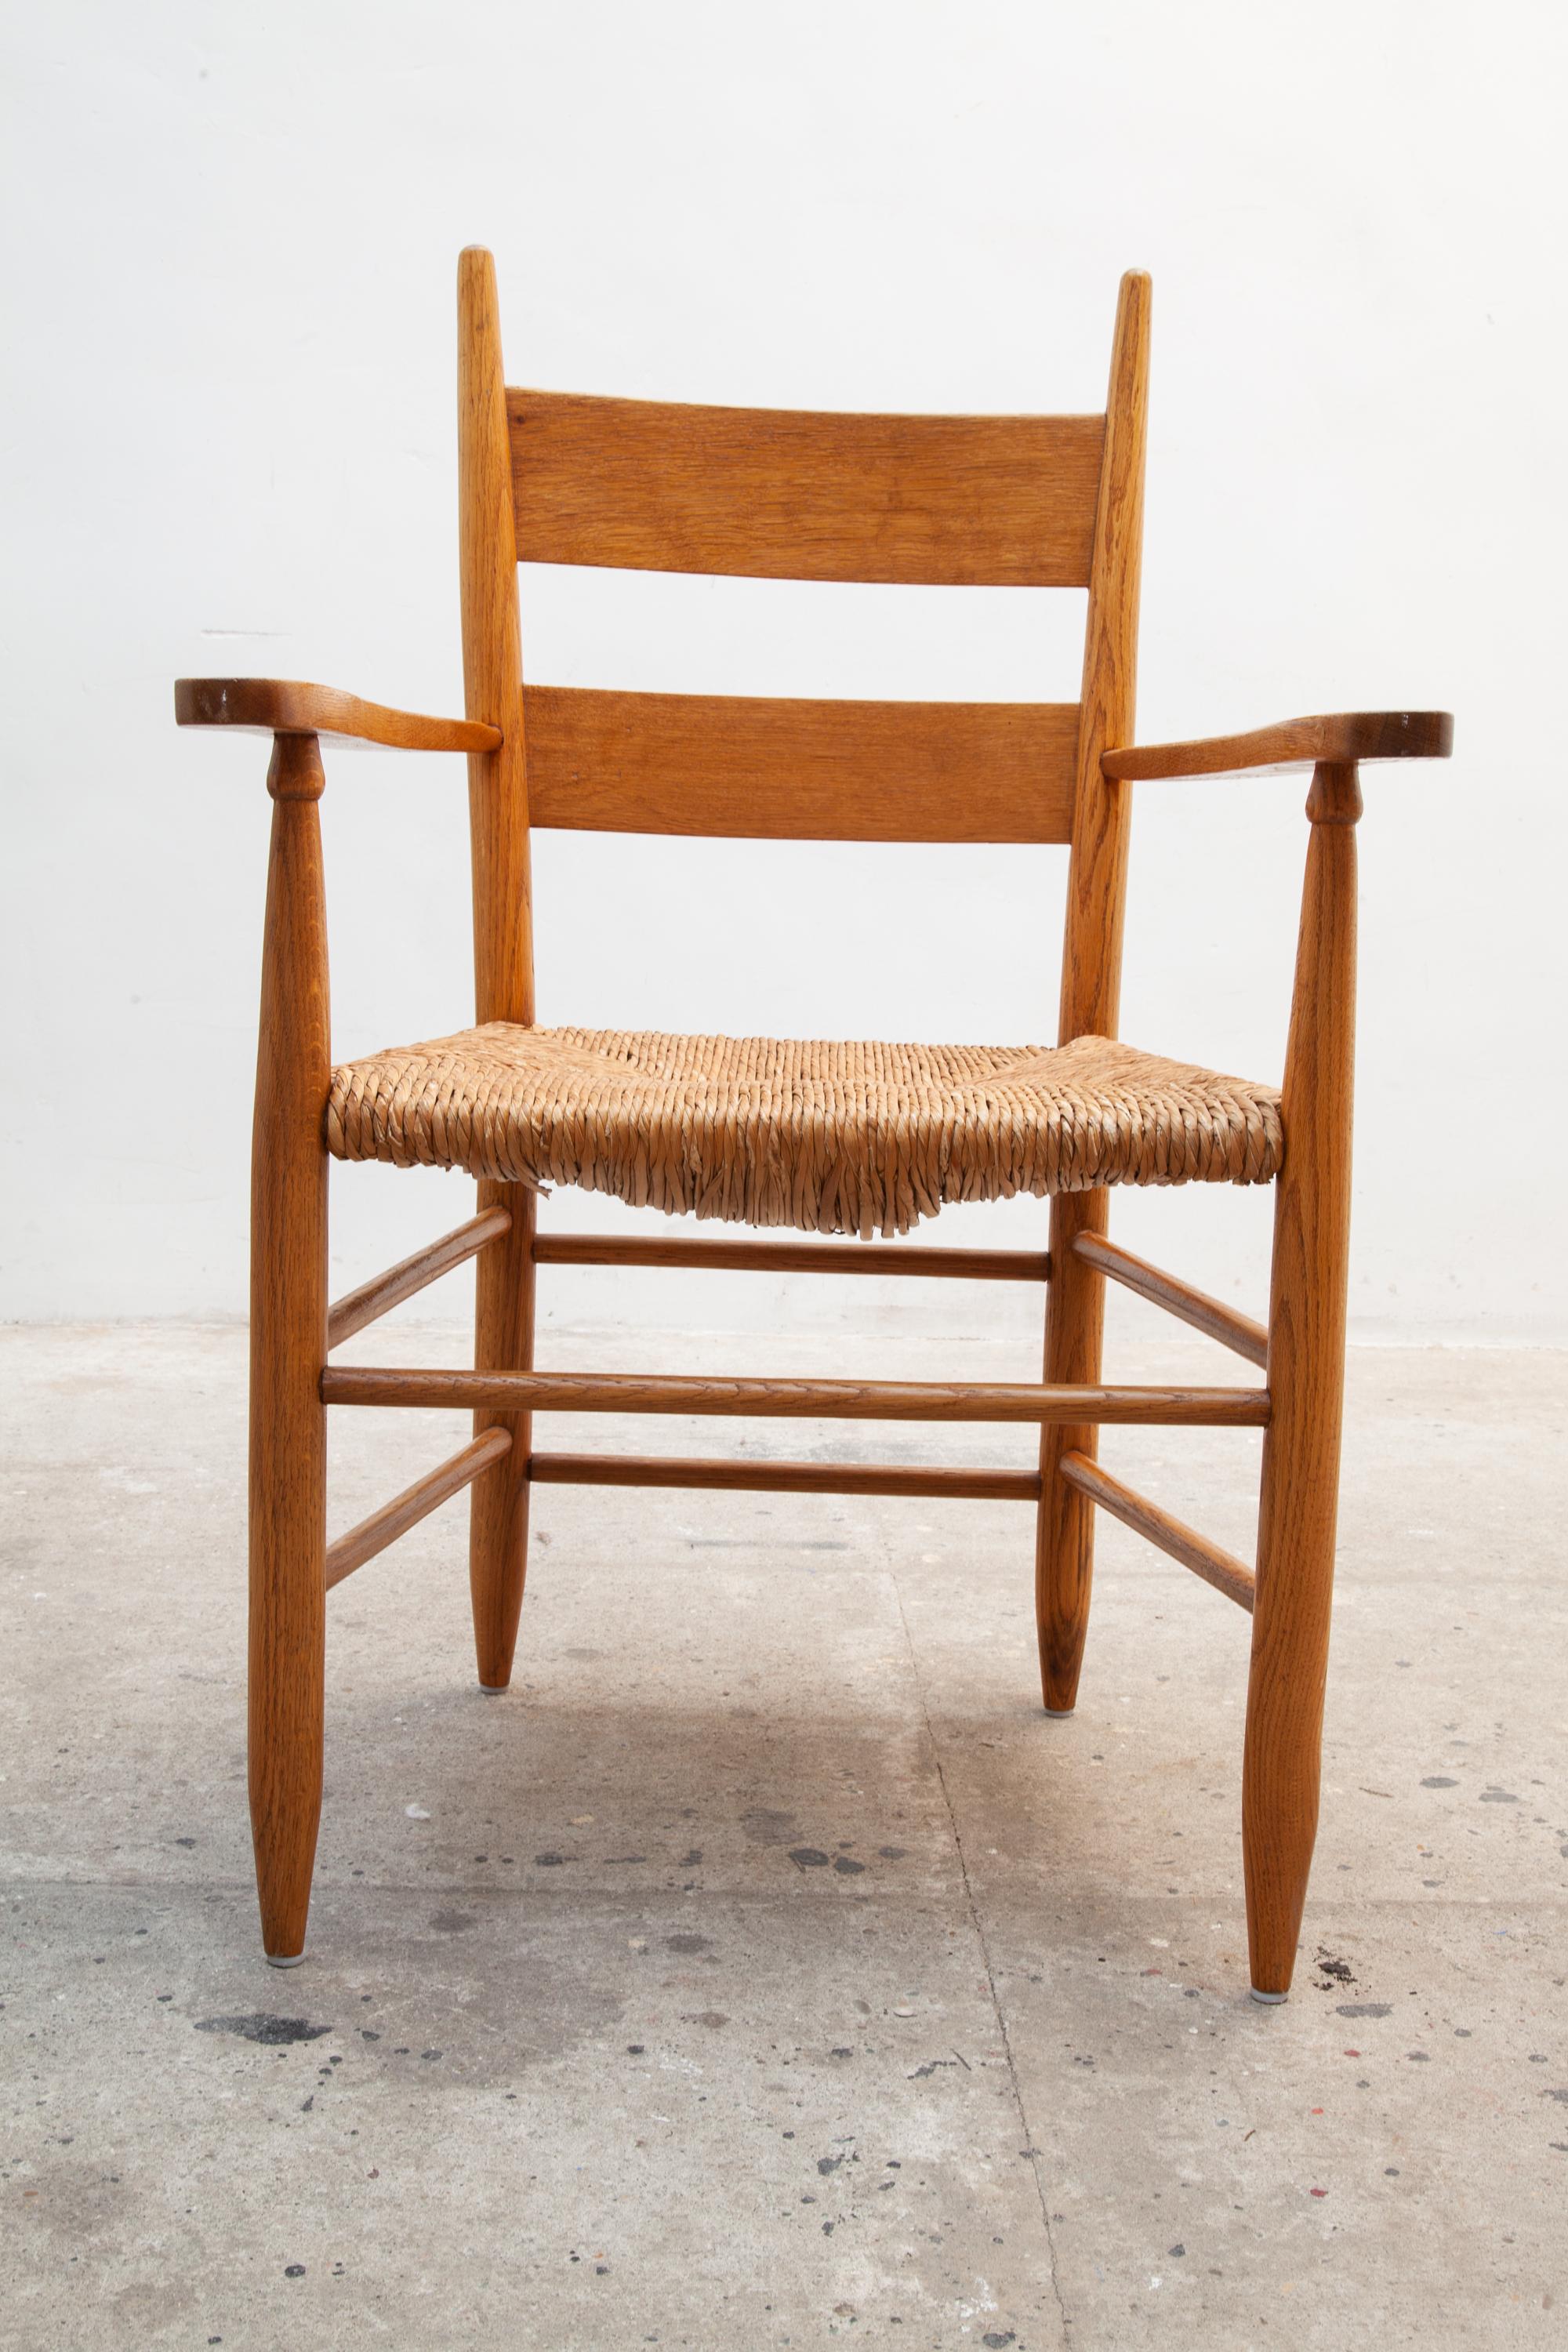 Swedish Vintage mid-century armchair. Features a wooden frame with beautifully shaped armrests. Detailed design of pleasant curves and raffia woven seat.
Dimensions:62W x 95H x 55D cm